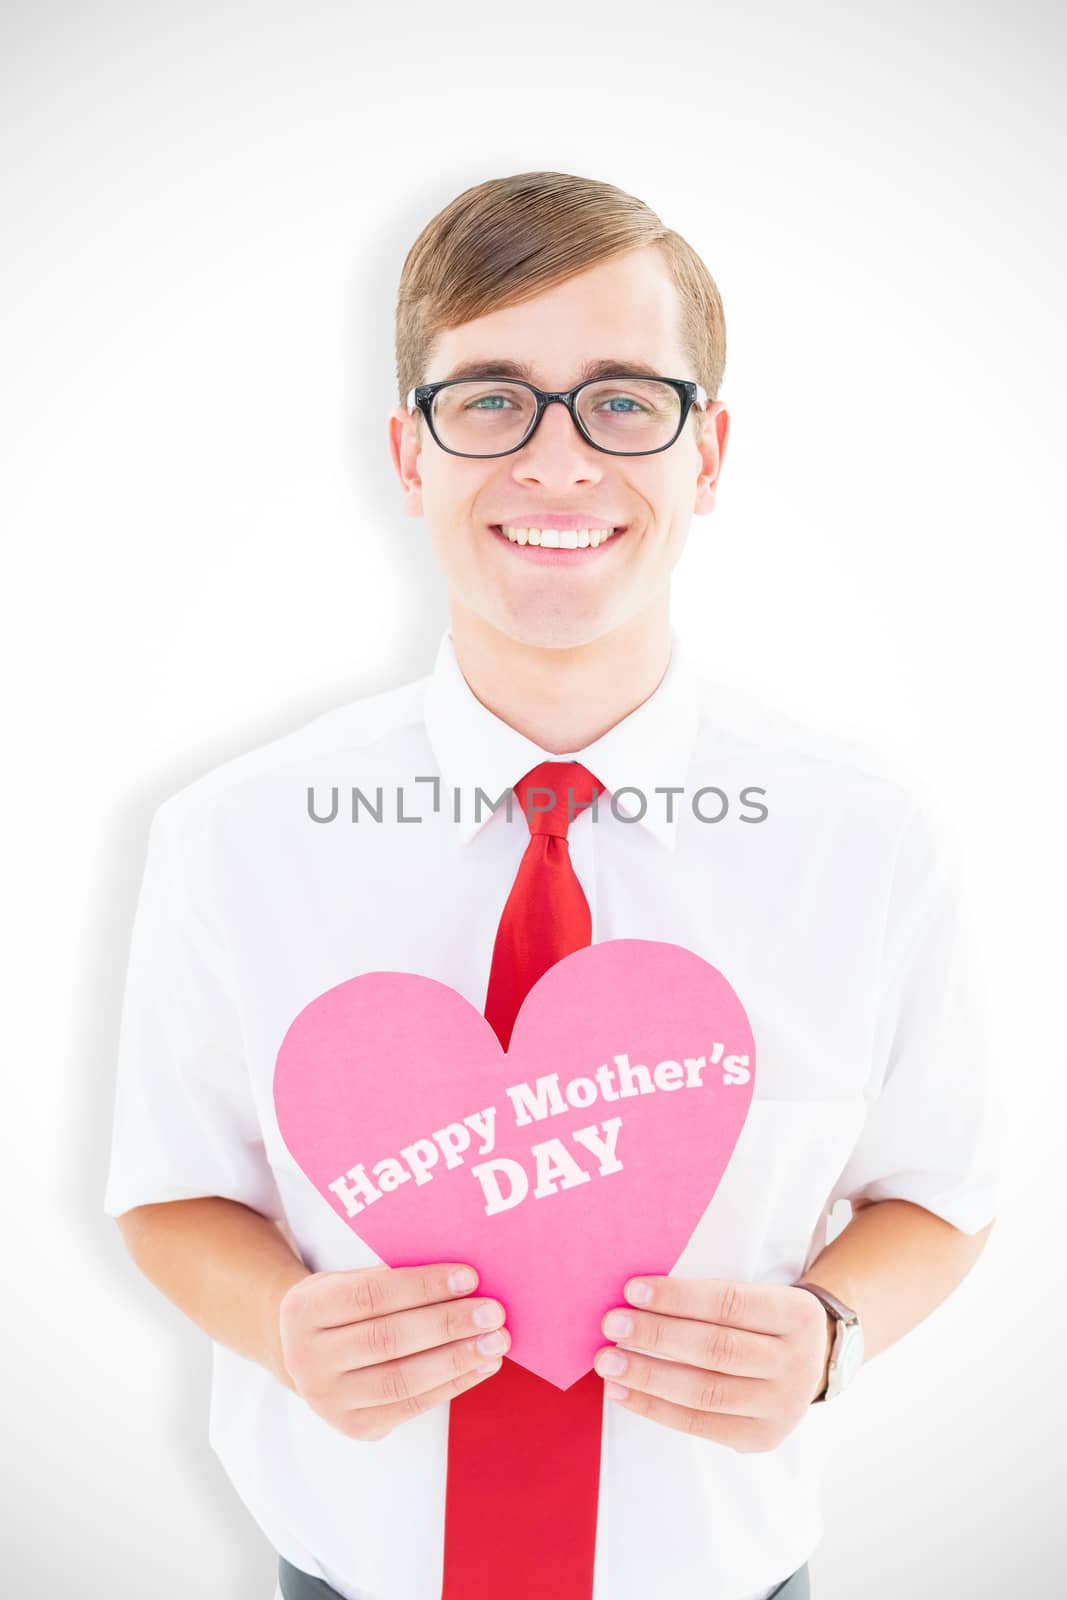 Composite image of geeky hipster holding heart card by Wavebreakmedia